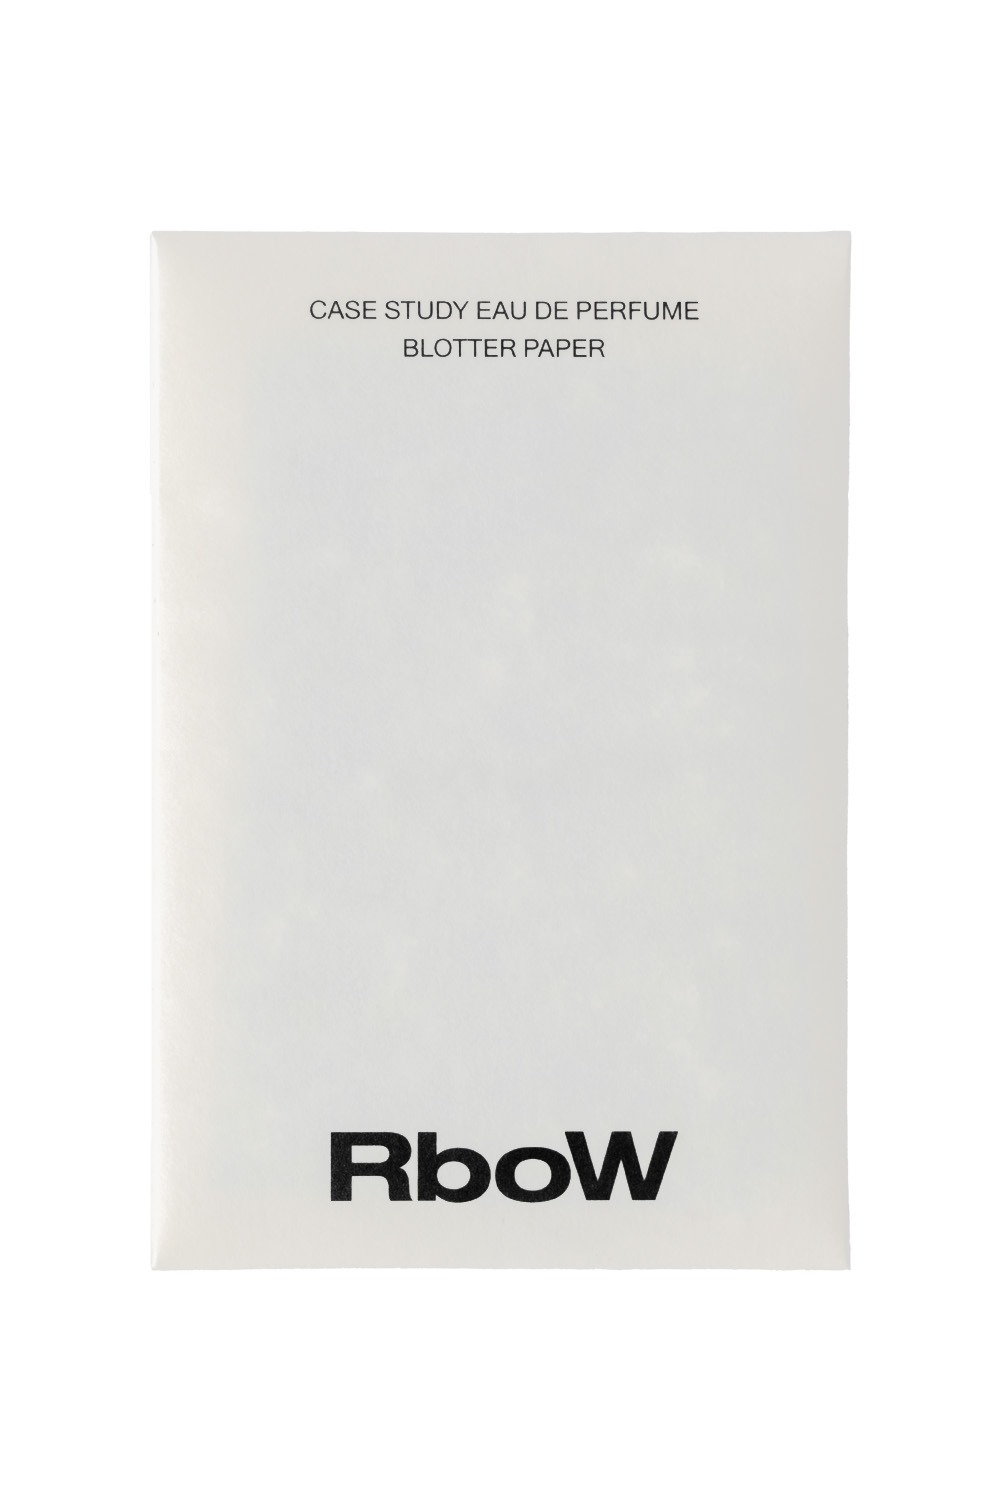 Rbow Blotter Paper